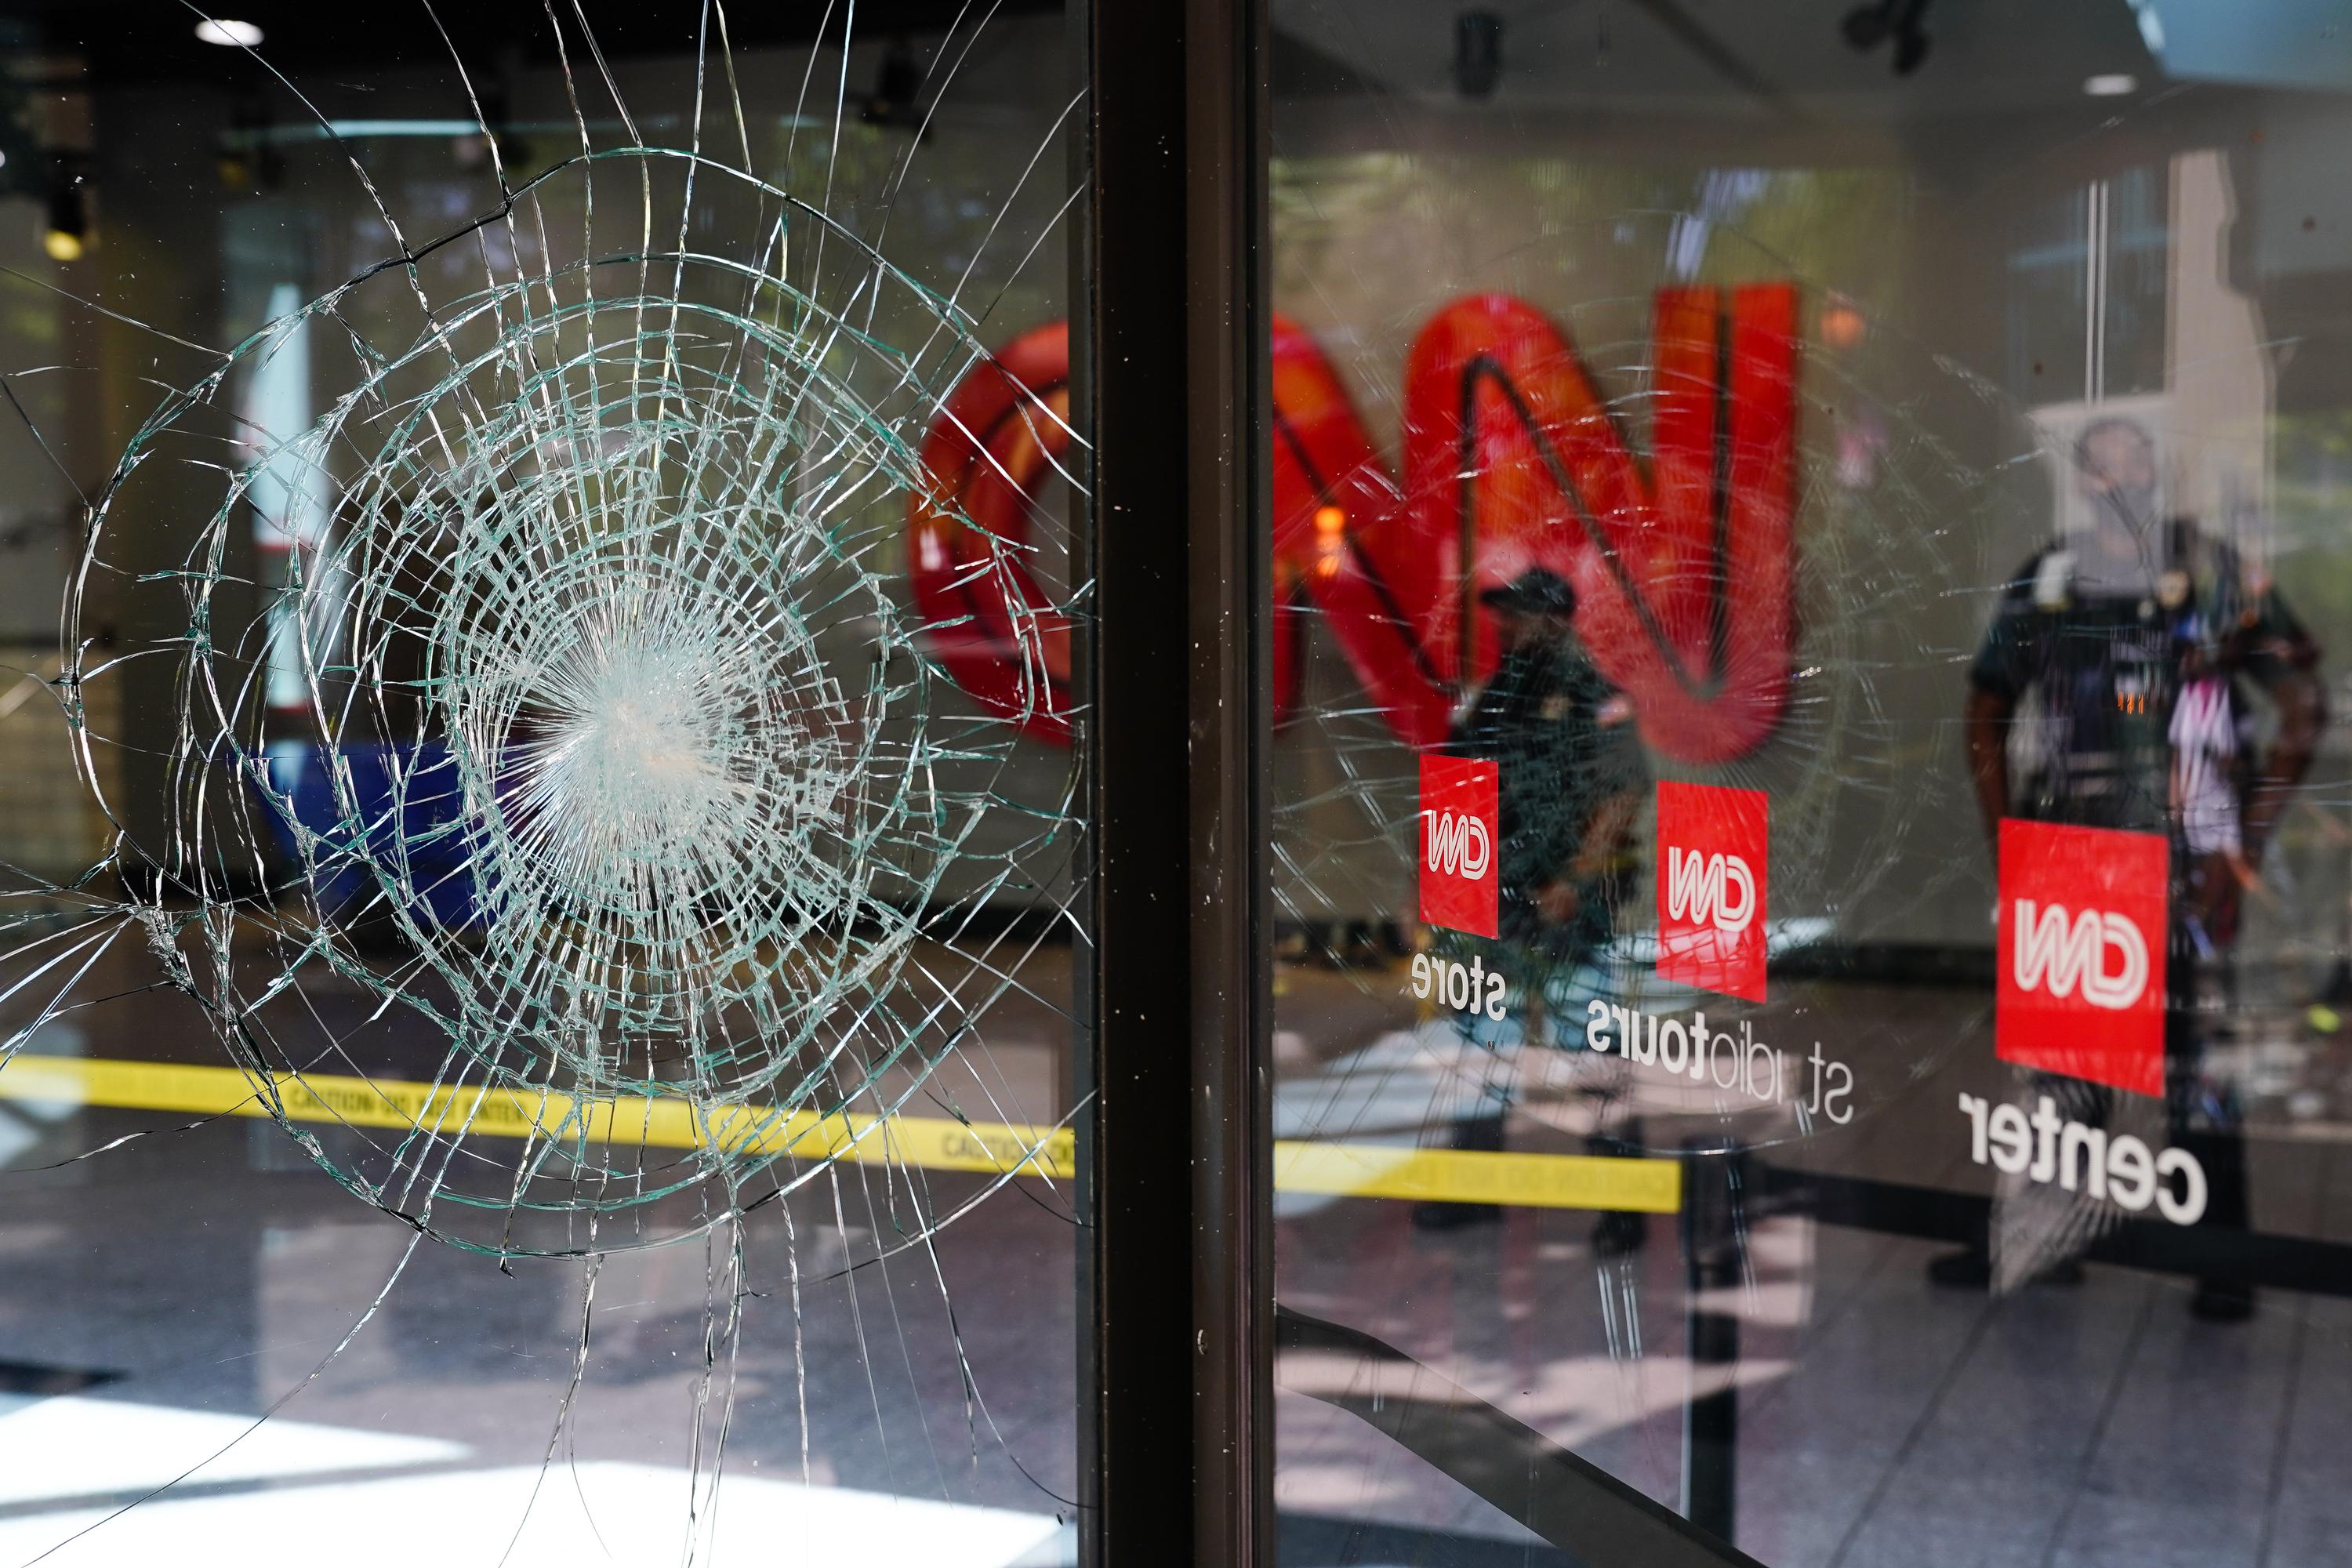 A crack in the glass door at CNN Center.